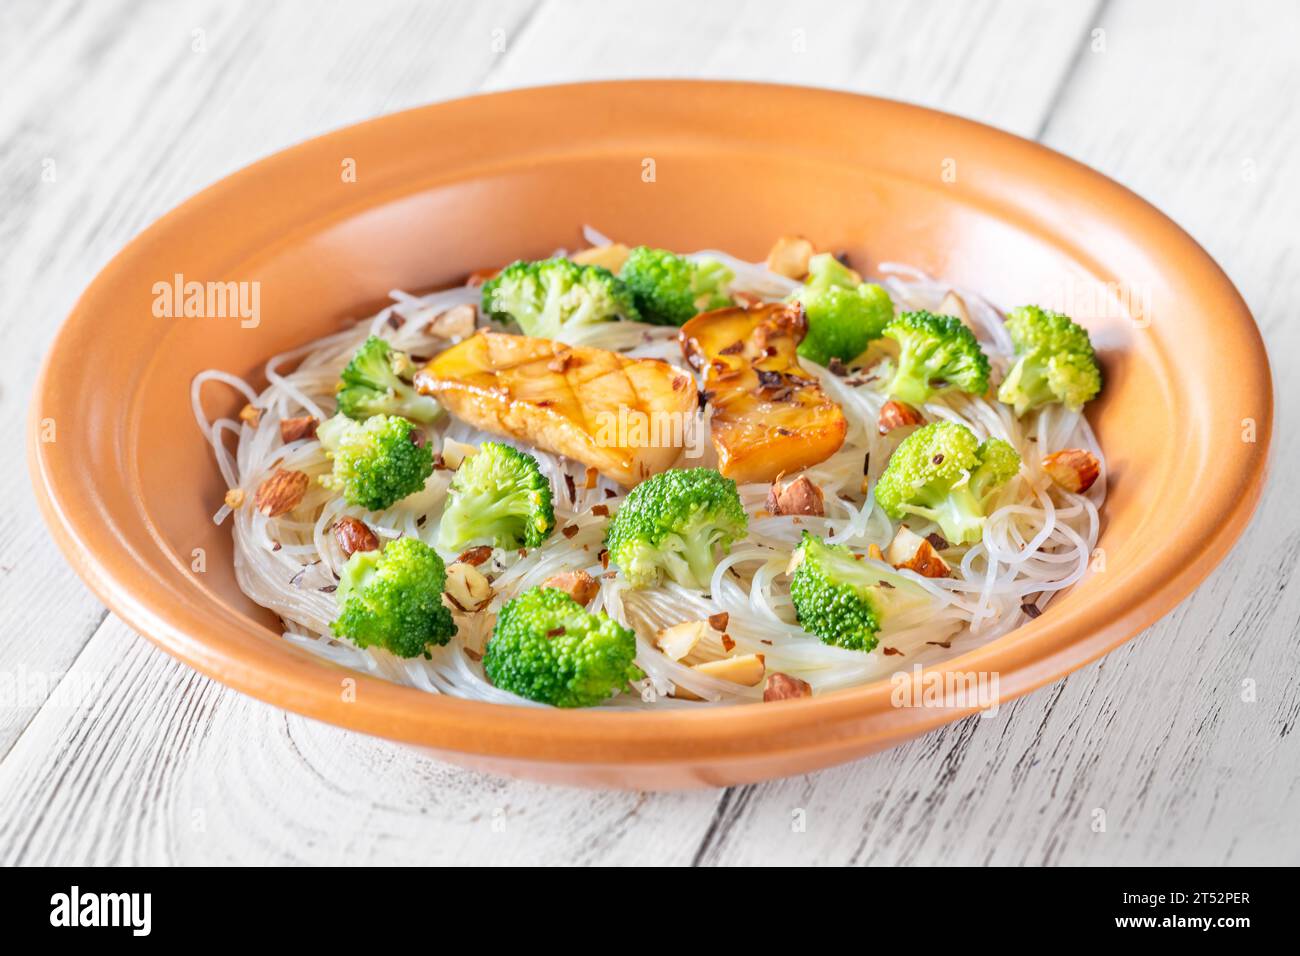 Cellophane noodles with broccoli, almonds and mushrooms Stock Photo